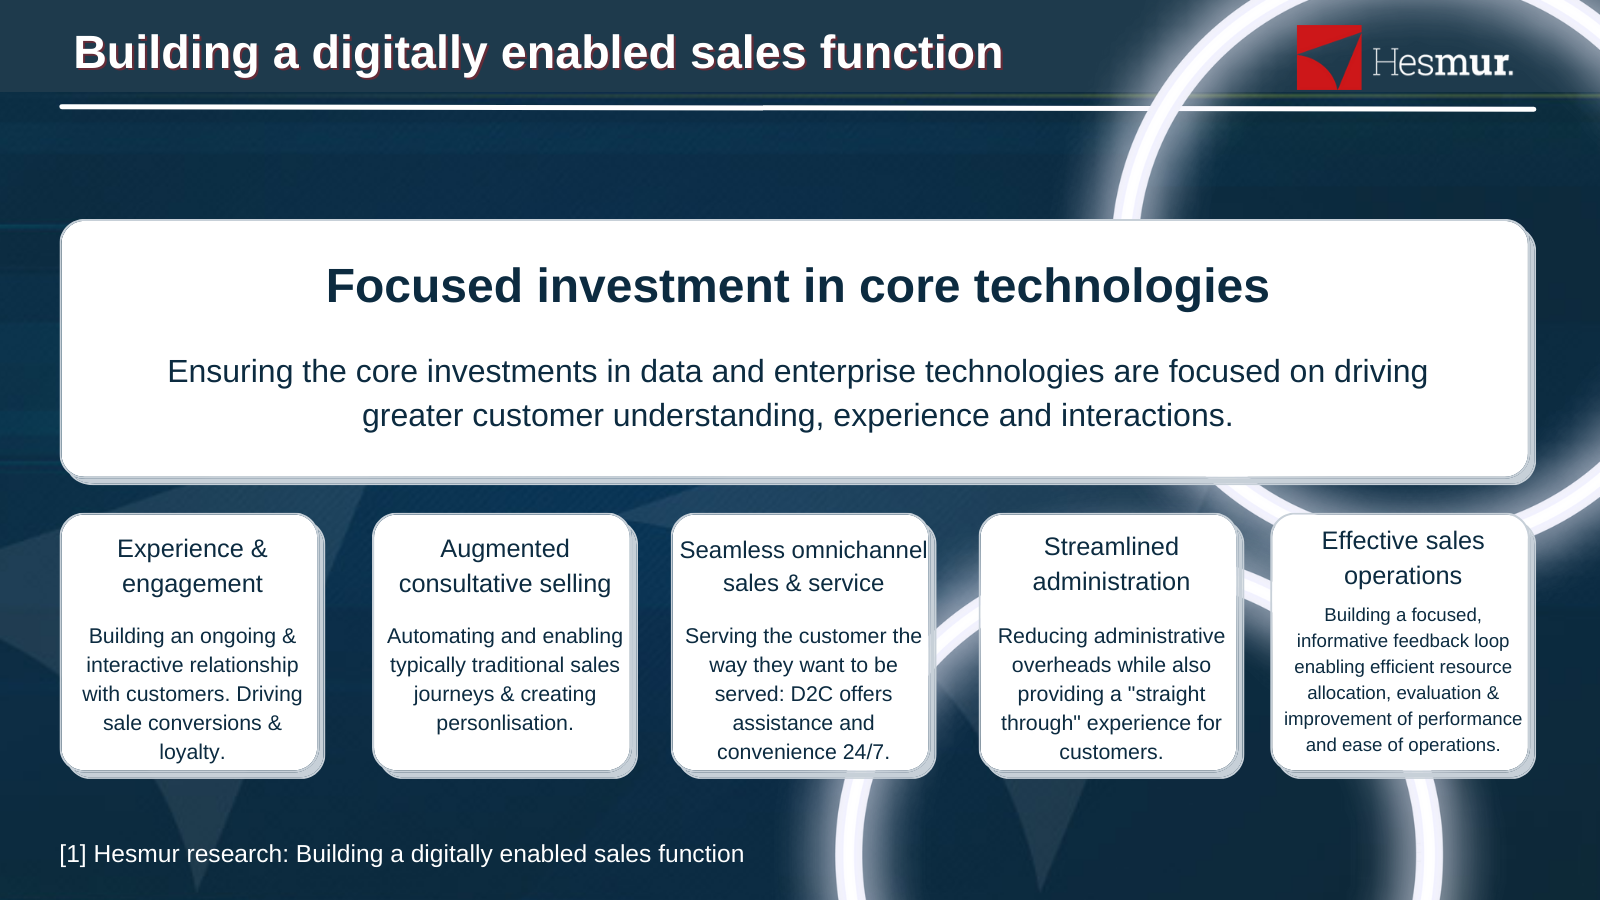 Infographic displaying Hesmur research; Building a digitally enabled sales function through focused investment in core technologies.